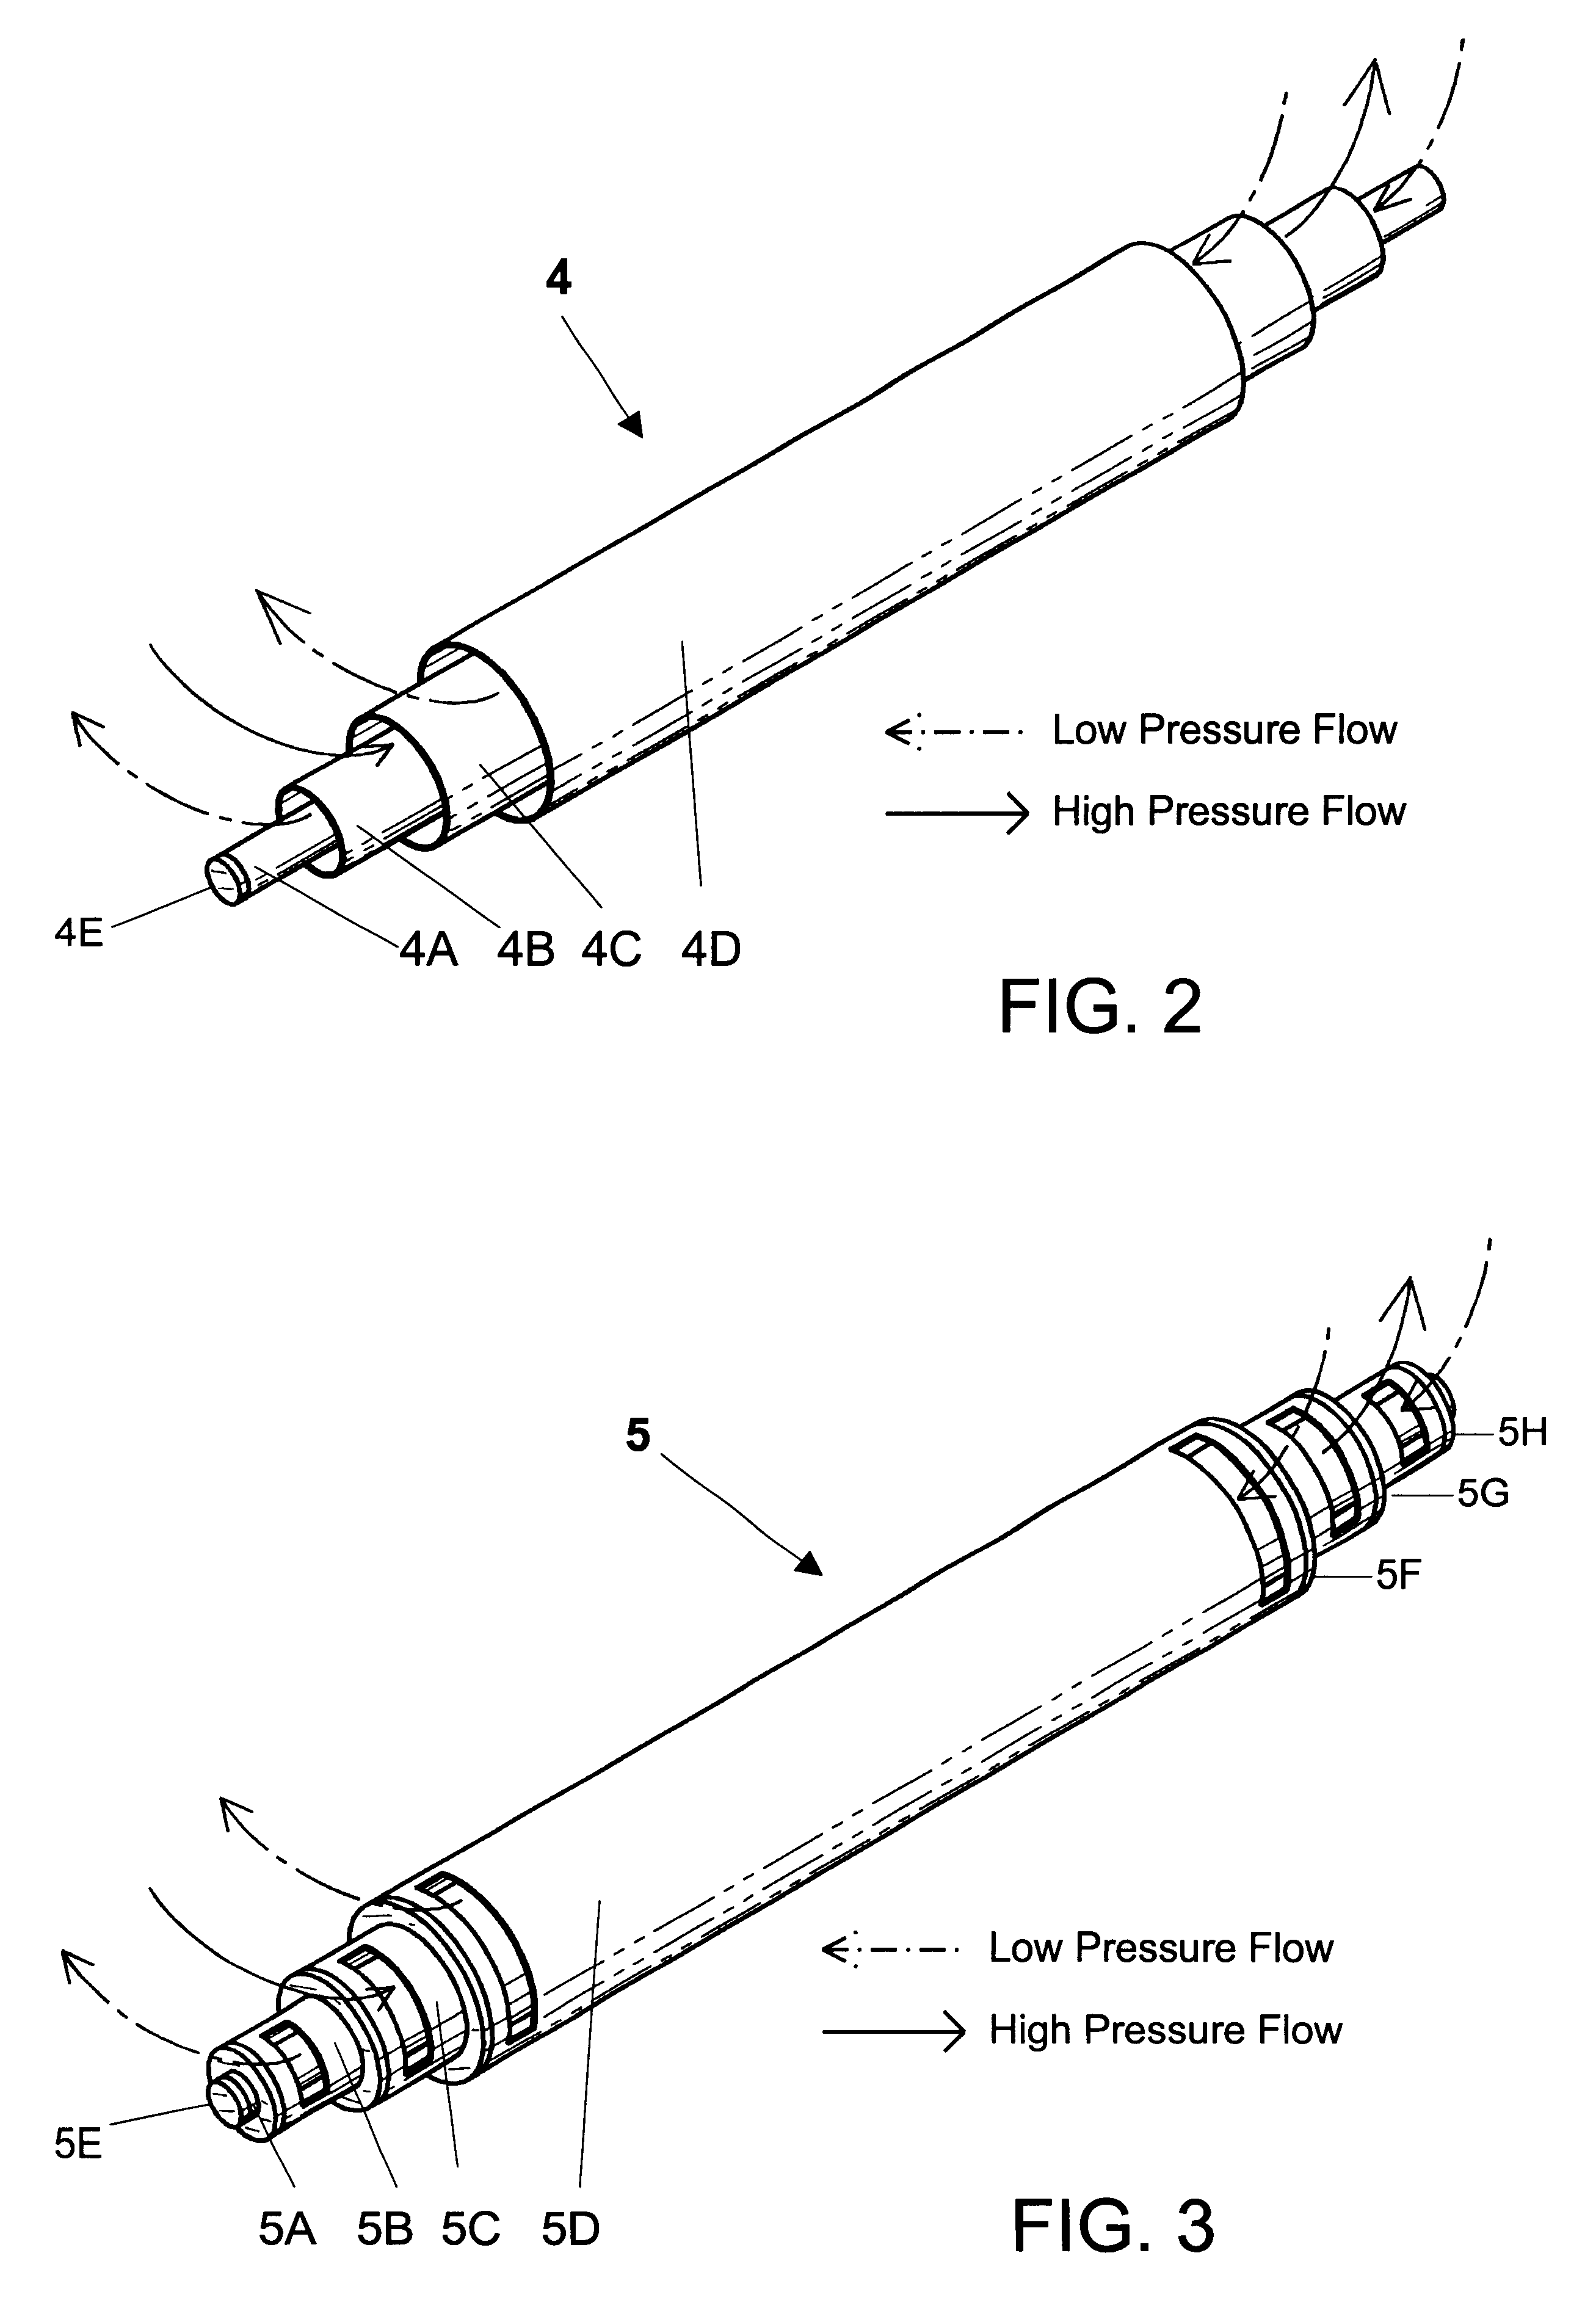 Annular flow concentric tube recuperator